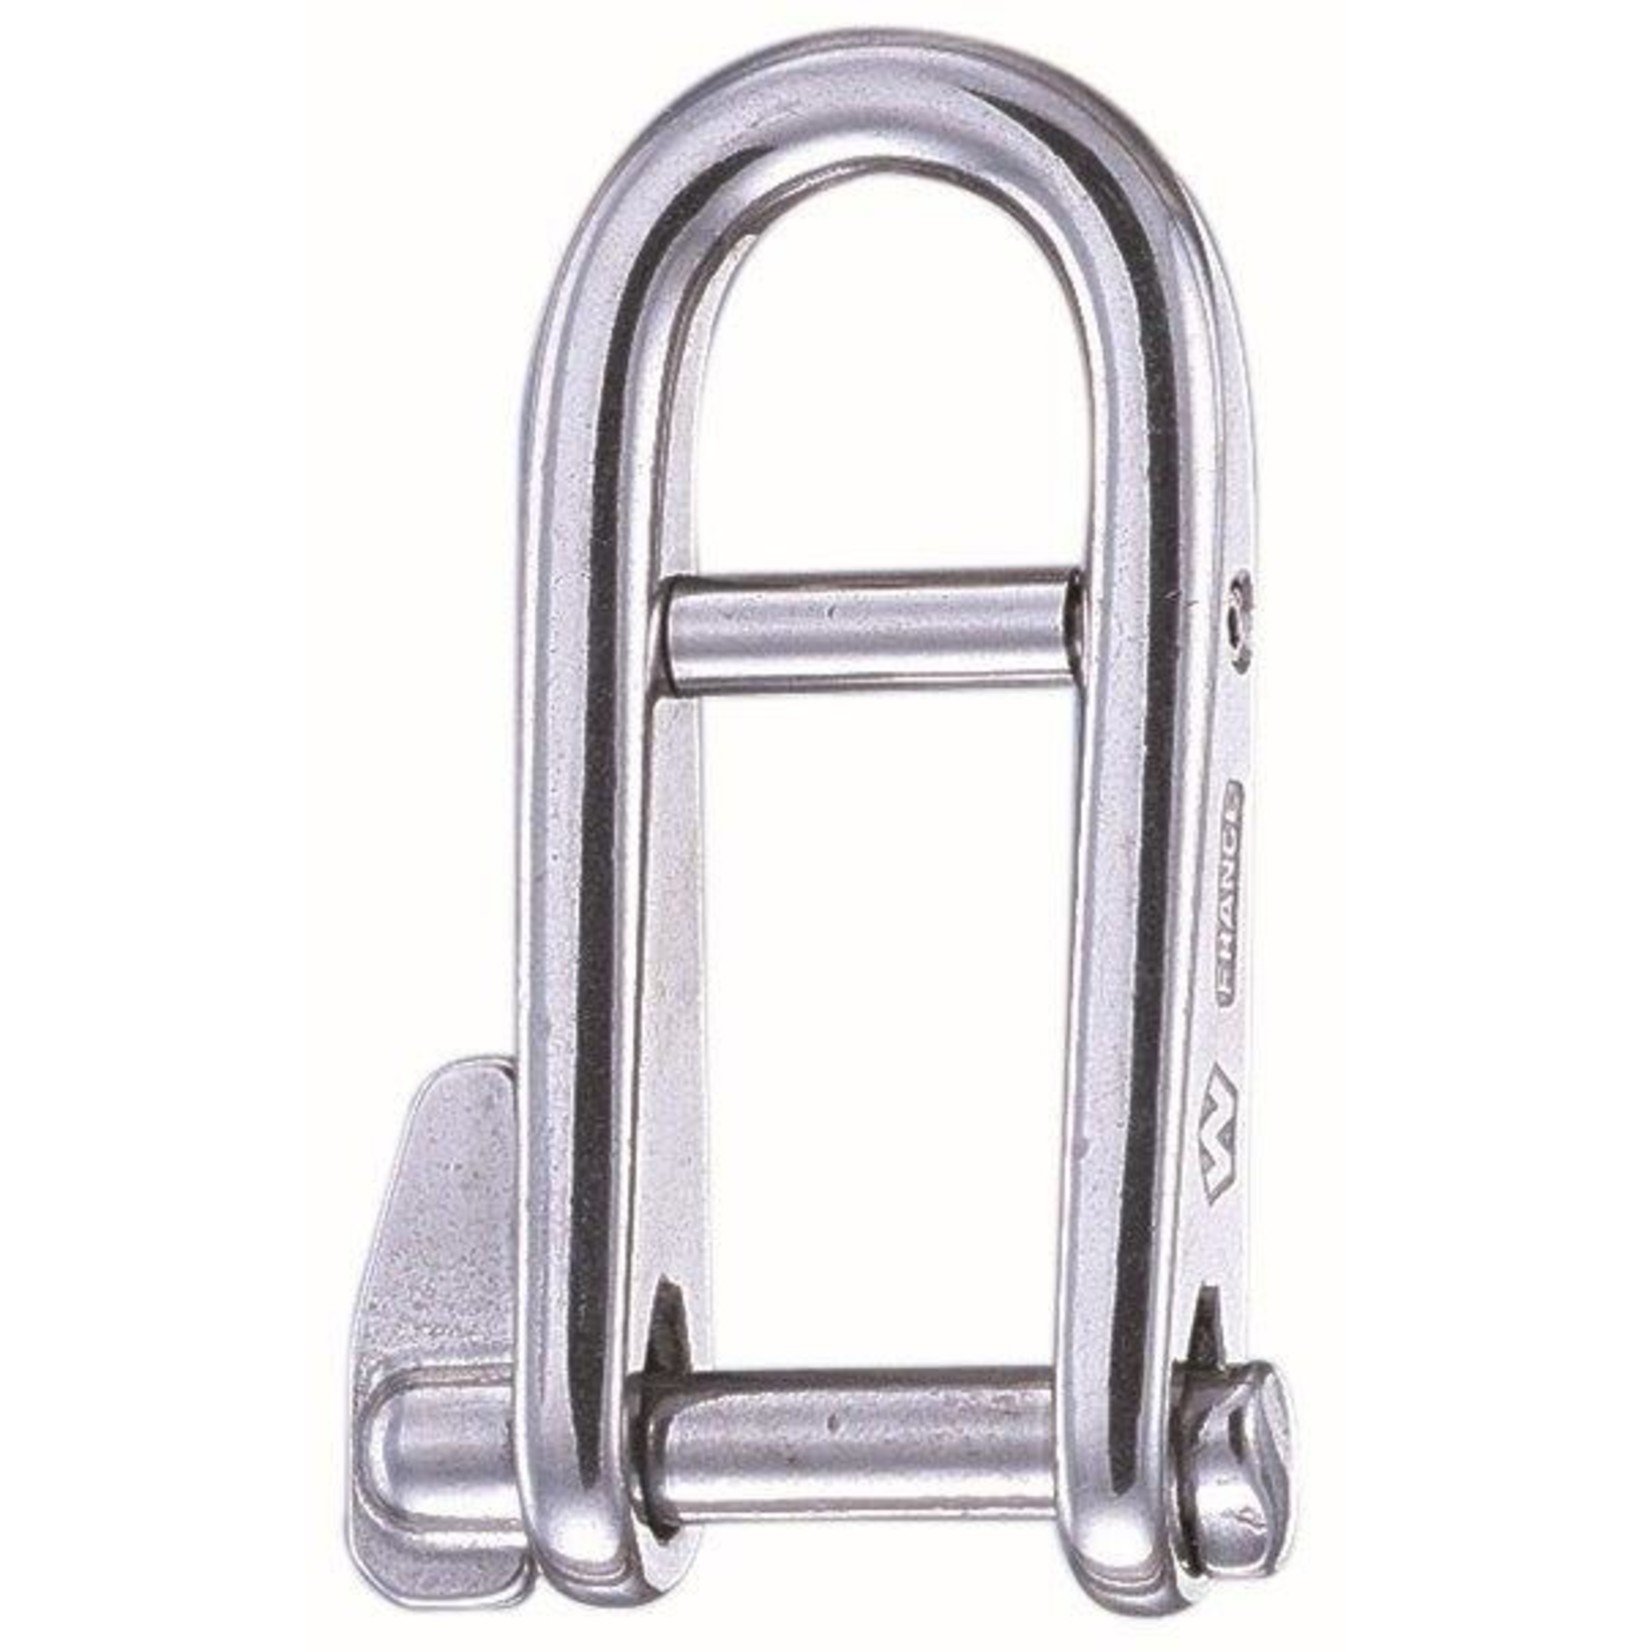 Wichard Key pin shackle with bar - Dia 5 mm